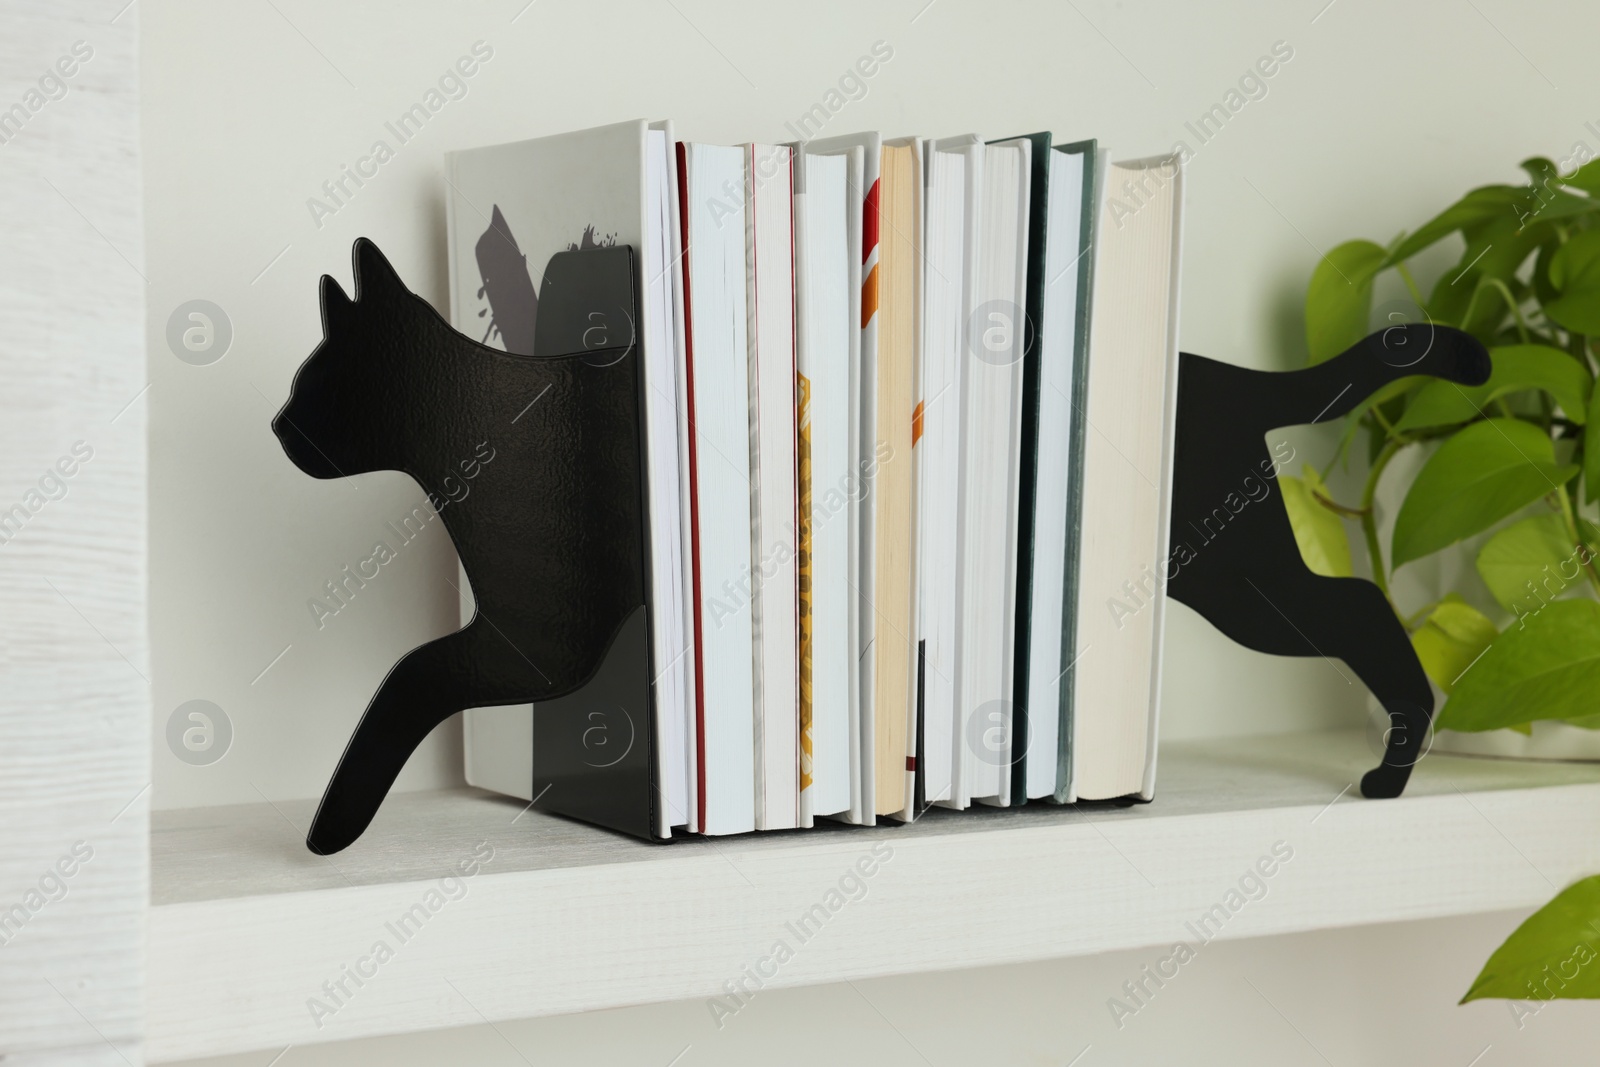 Photo of Decorative cat bookends with books and plant on shelf indoors